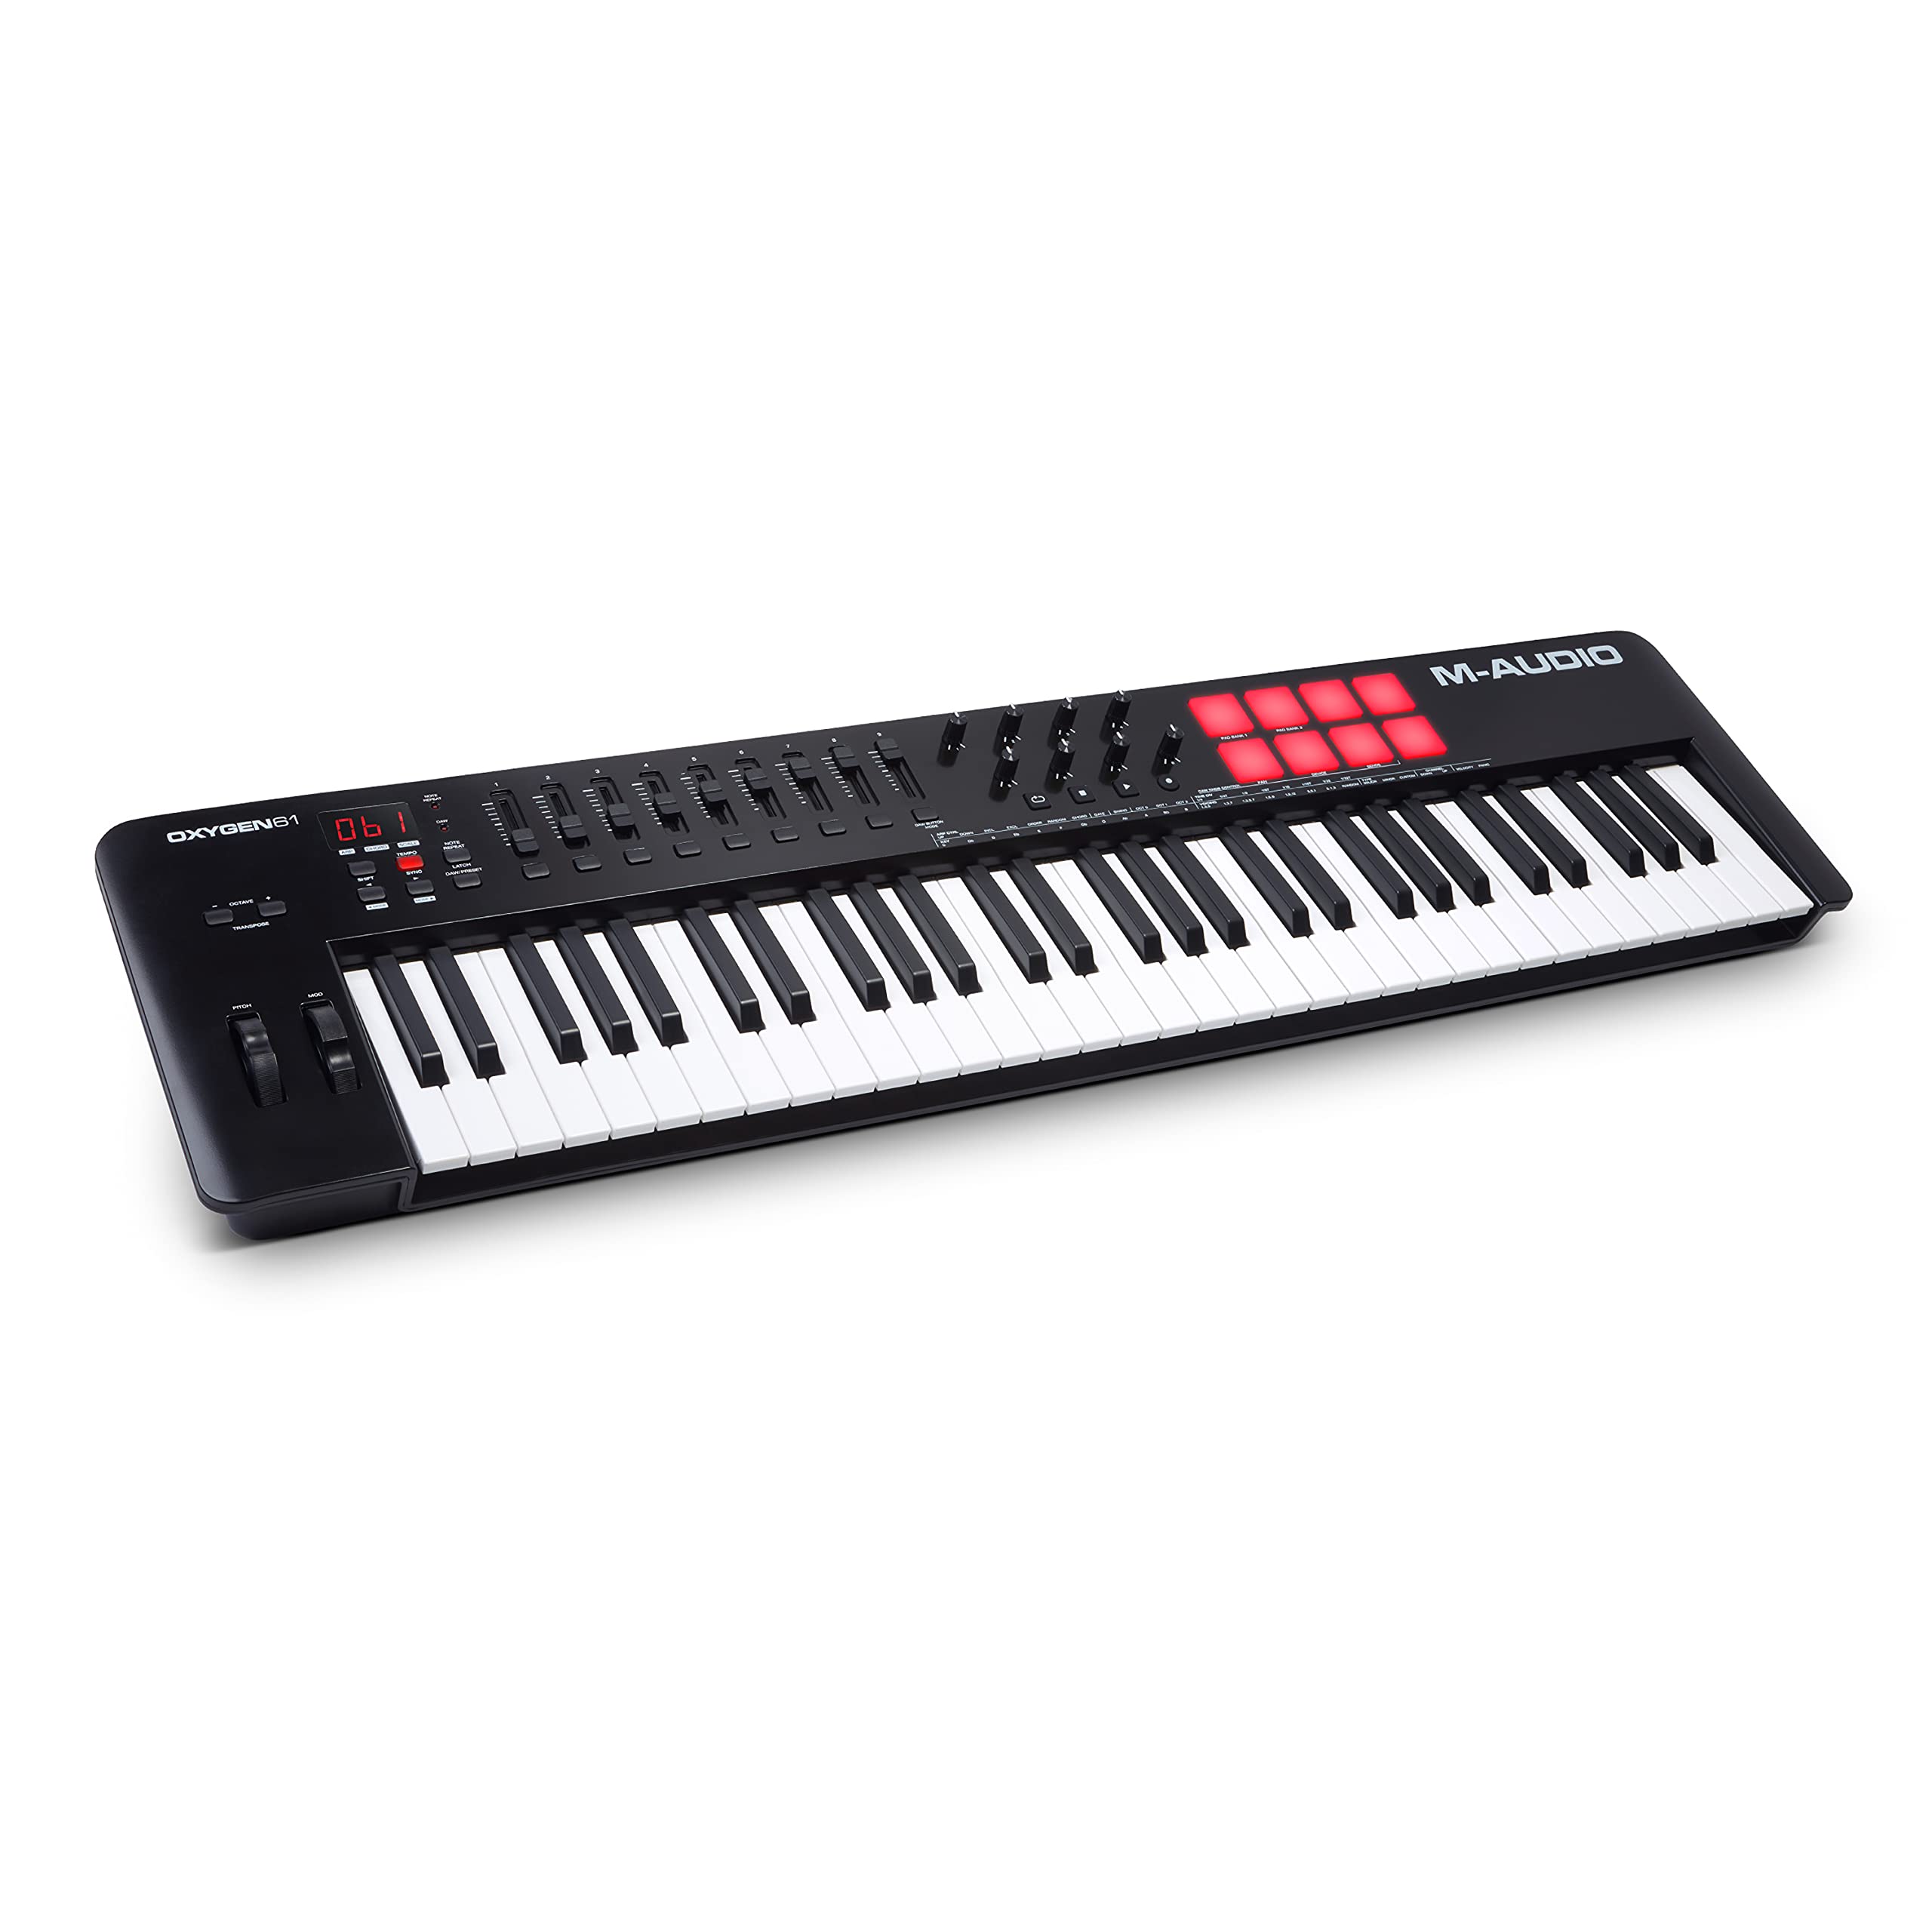 M-Audio Oxygen 61 (MKV) – 61 Key USB MIDI Keyboard Controller With Beat Pads, Smart Chord & Scale Modes, Arpeggiator and Software Suite Included